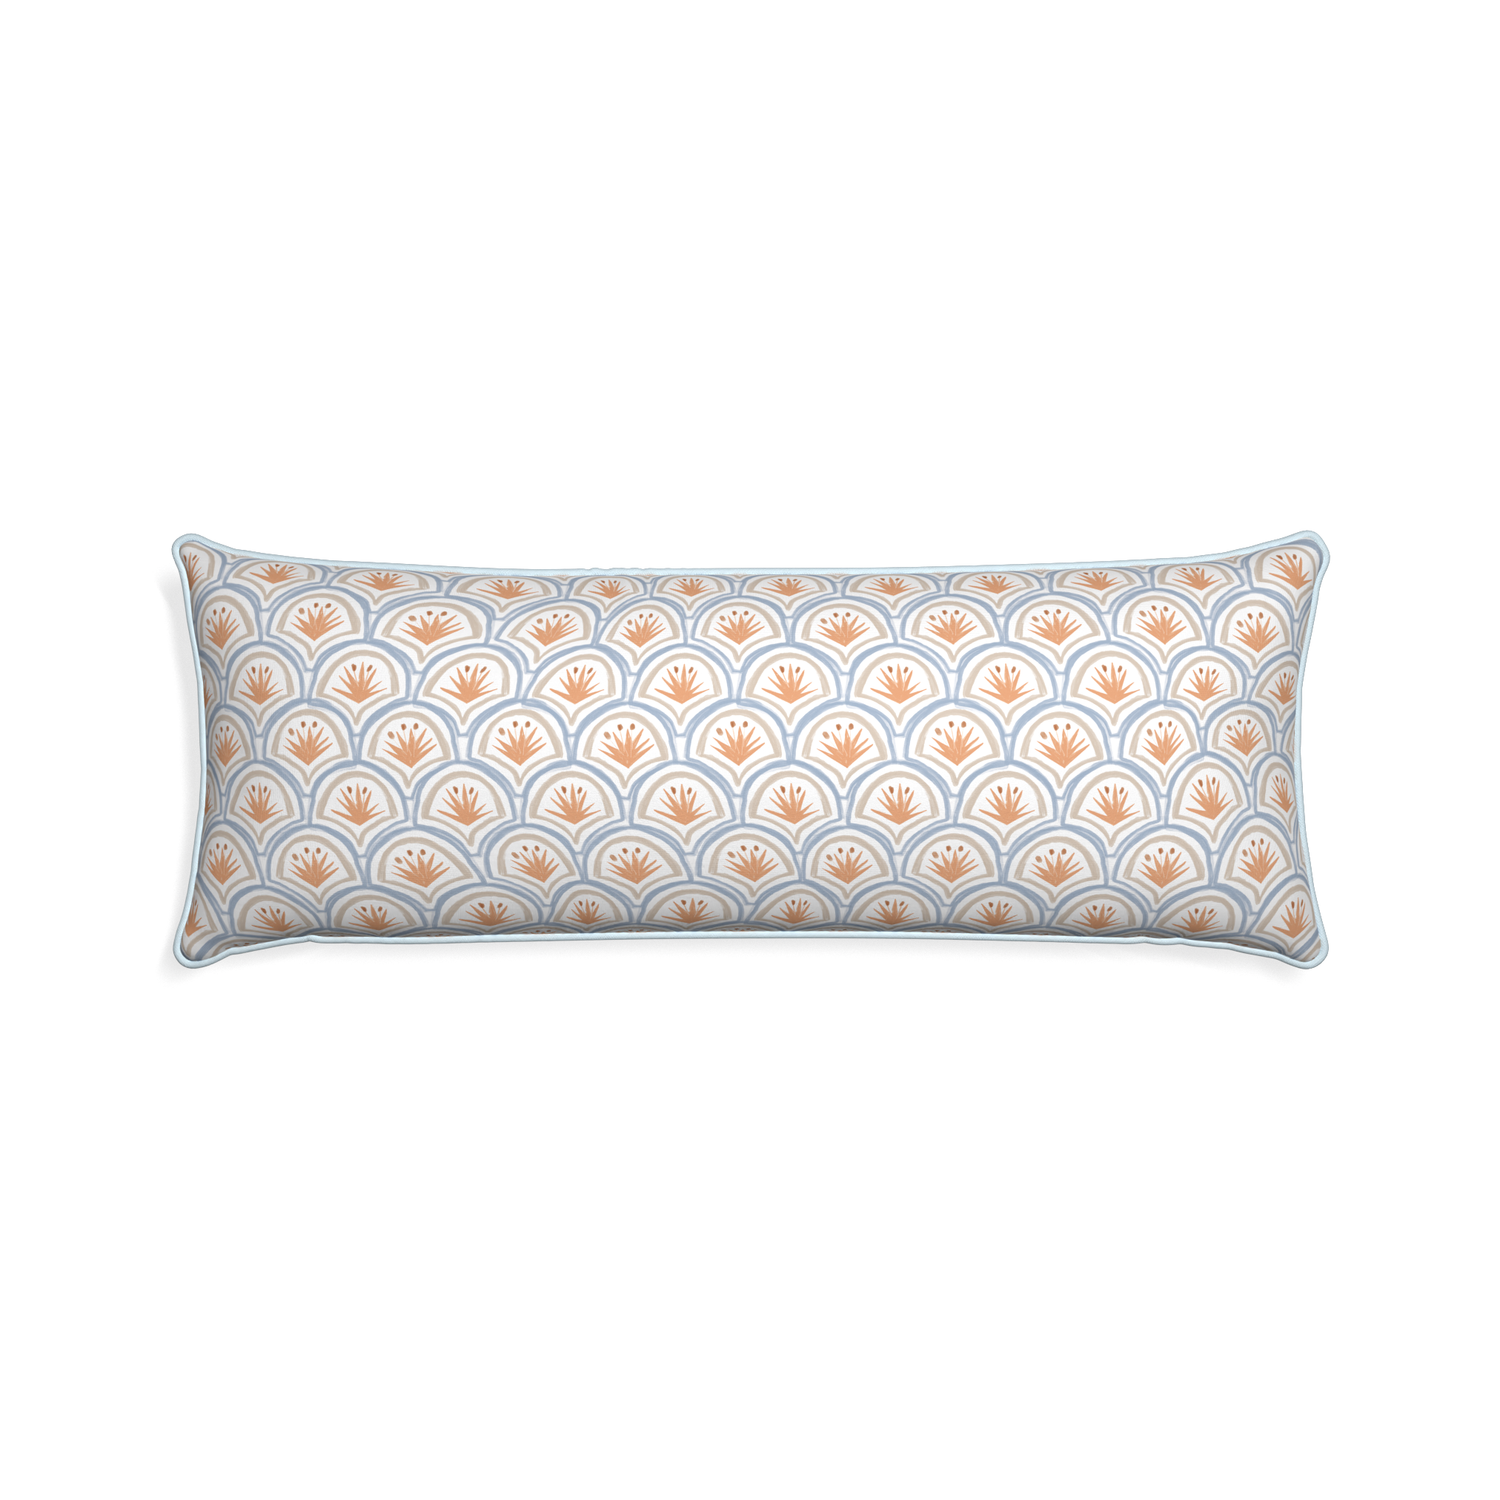 Xl-lumbar thatcher apricot custom pillow with powder piping on white background